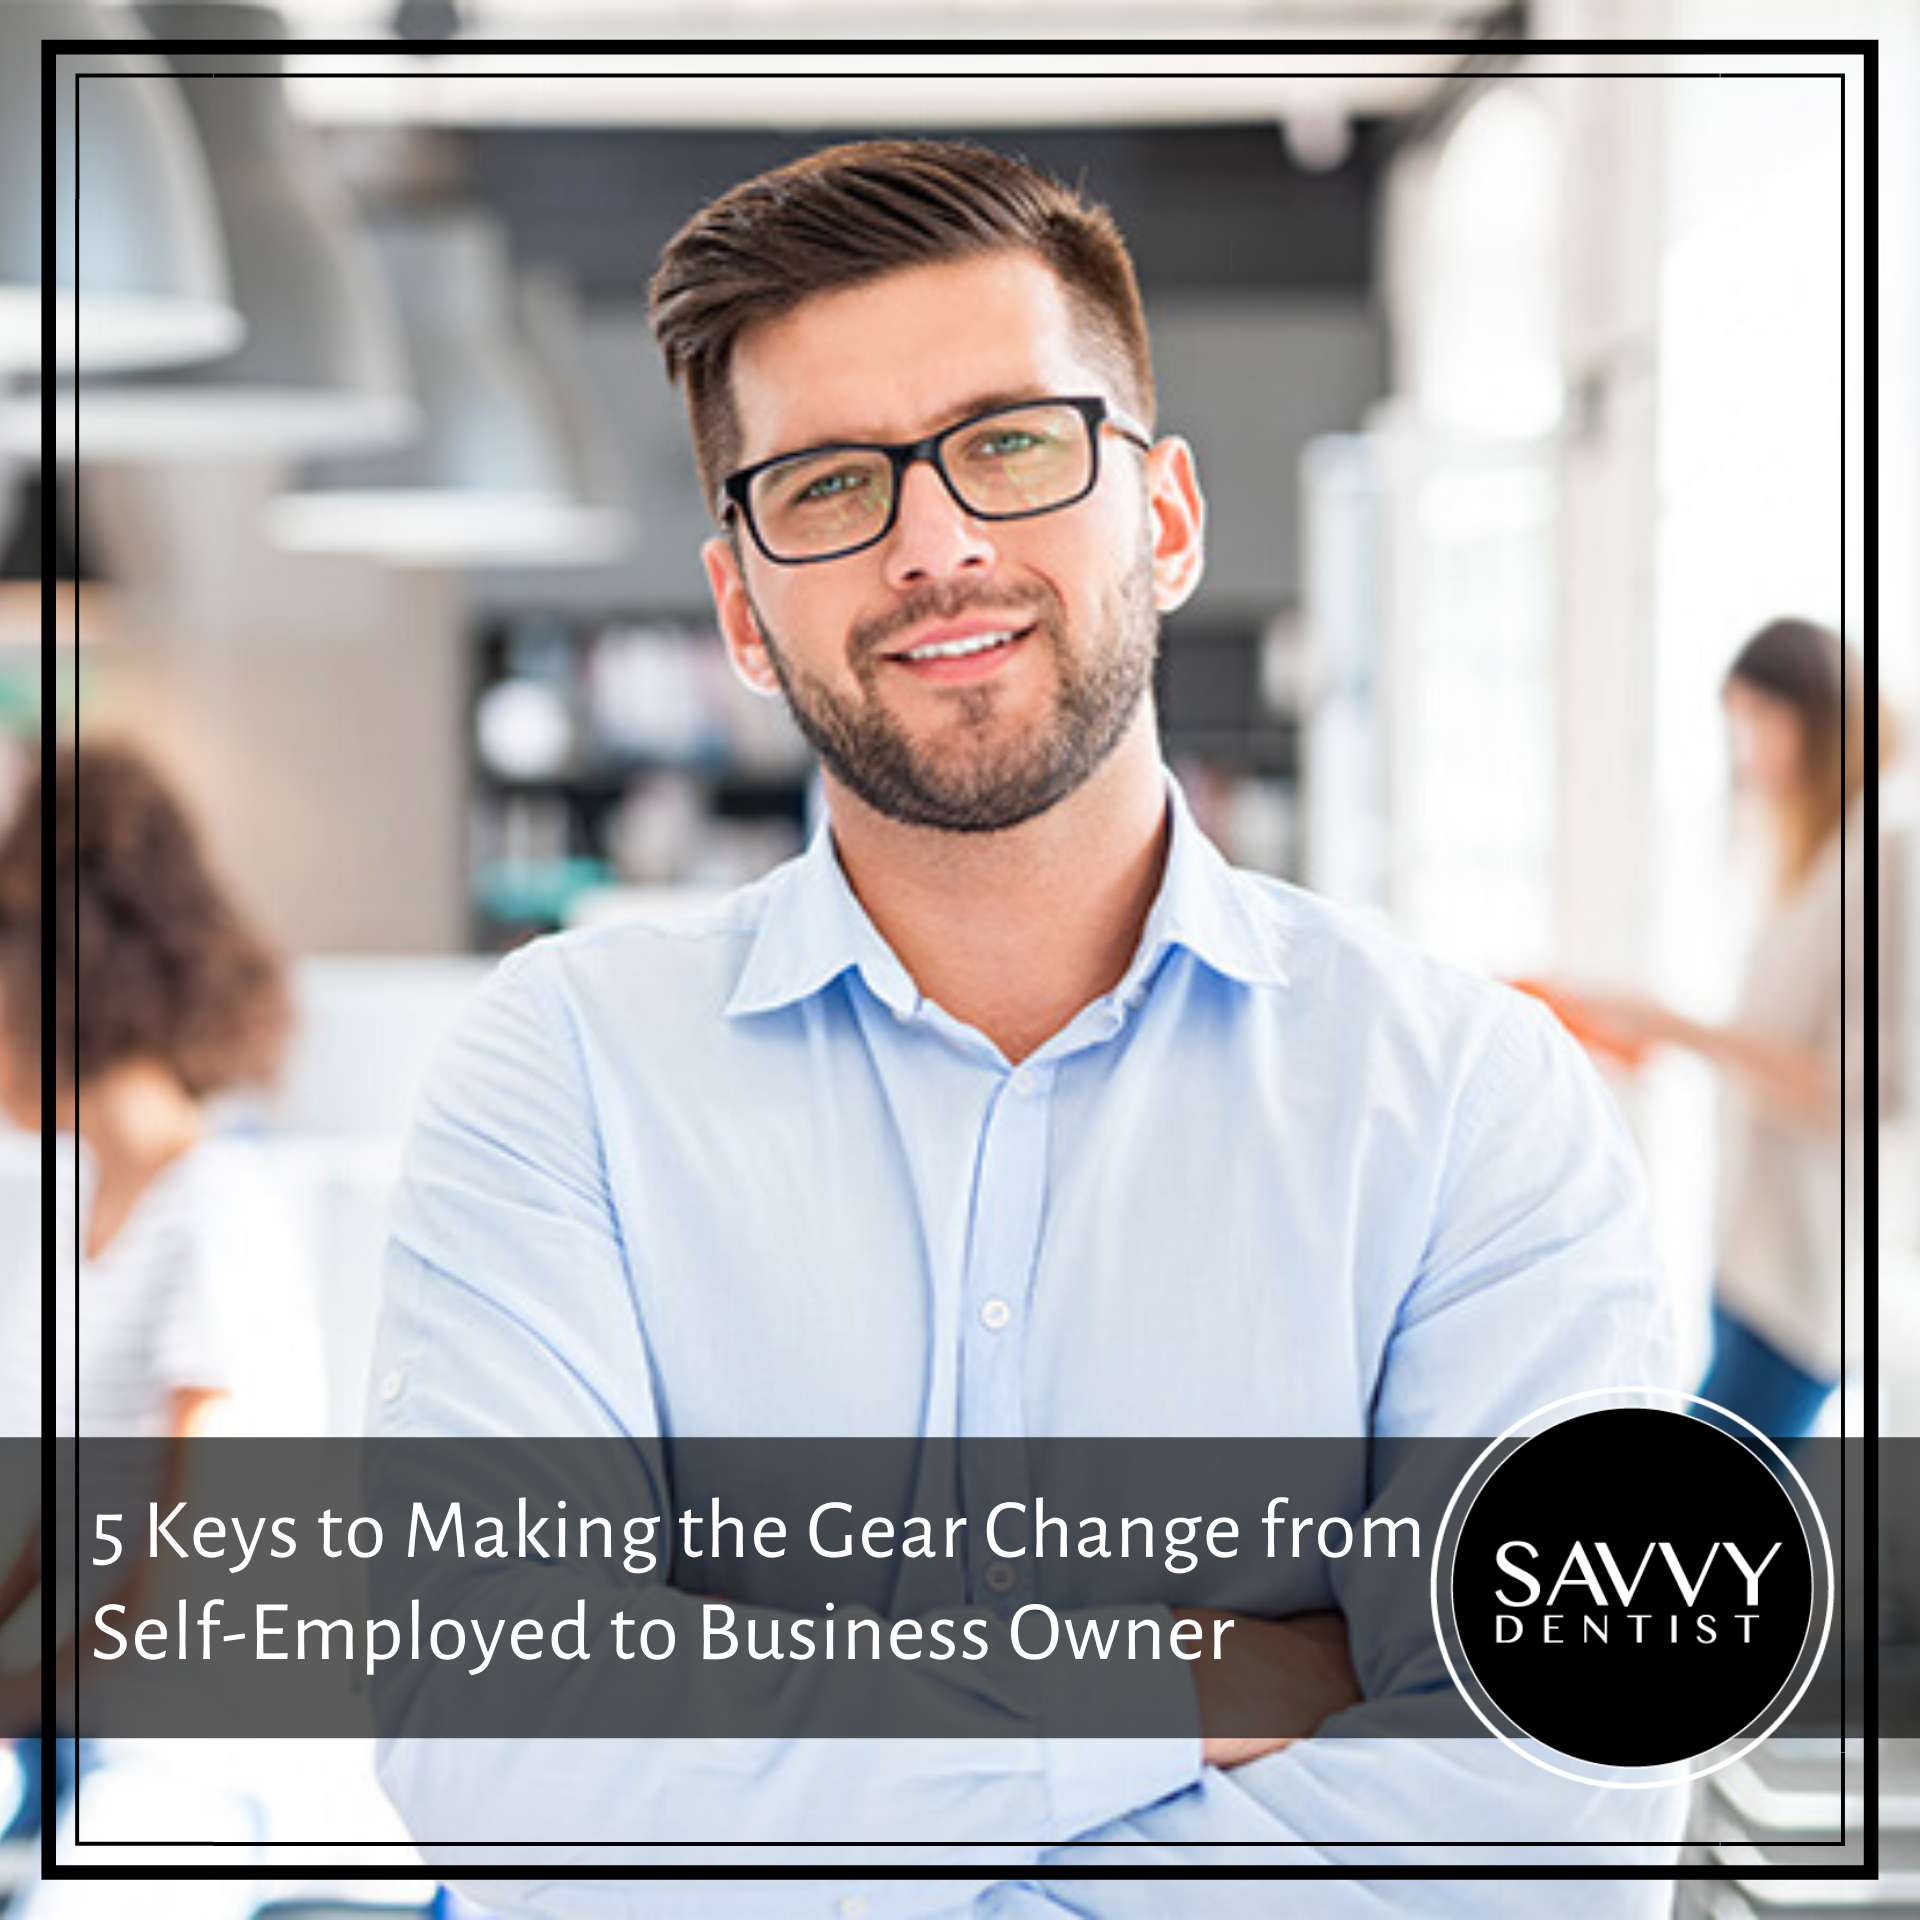 5 Keys to Making the Gear Change from Self-Employed to Business Owner